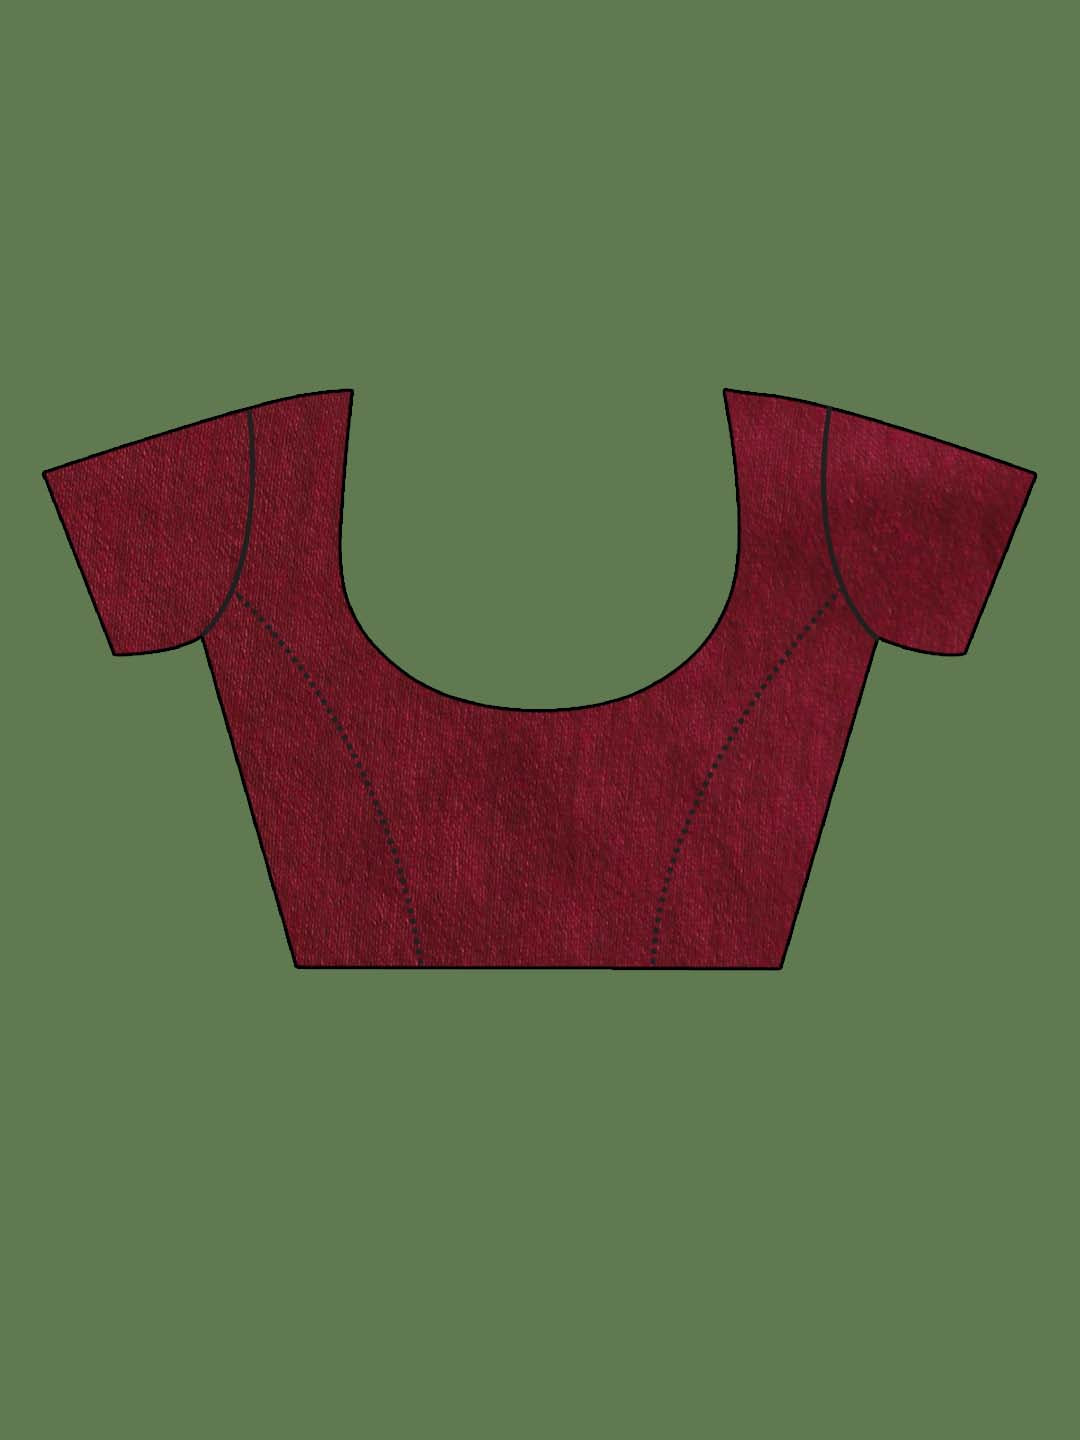 Indethnic Red Woven Design Daily Wear - Blouse Piece View